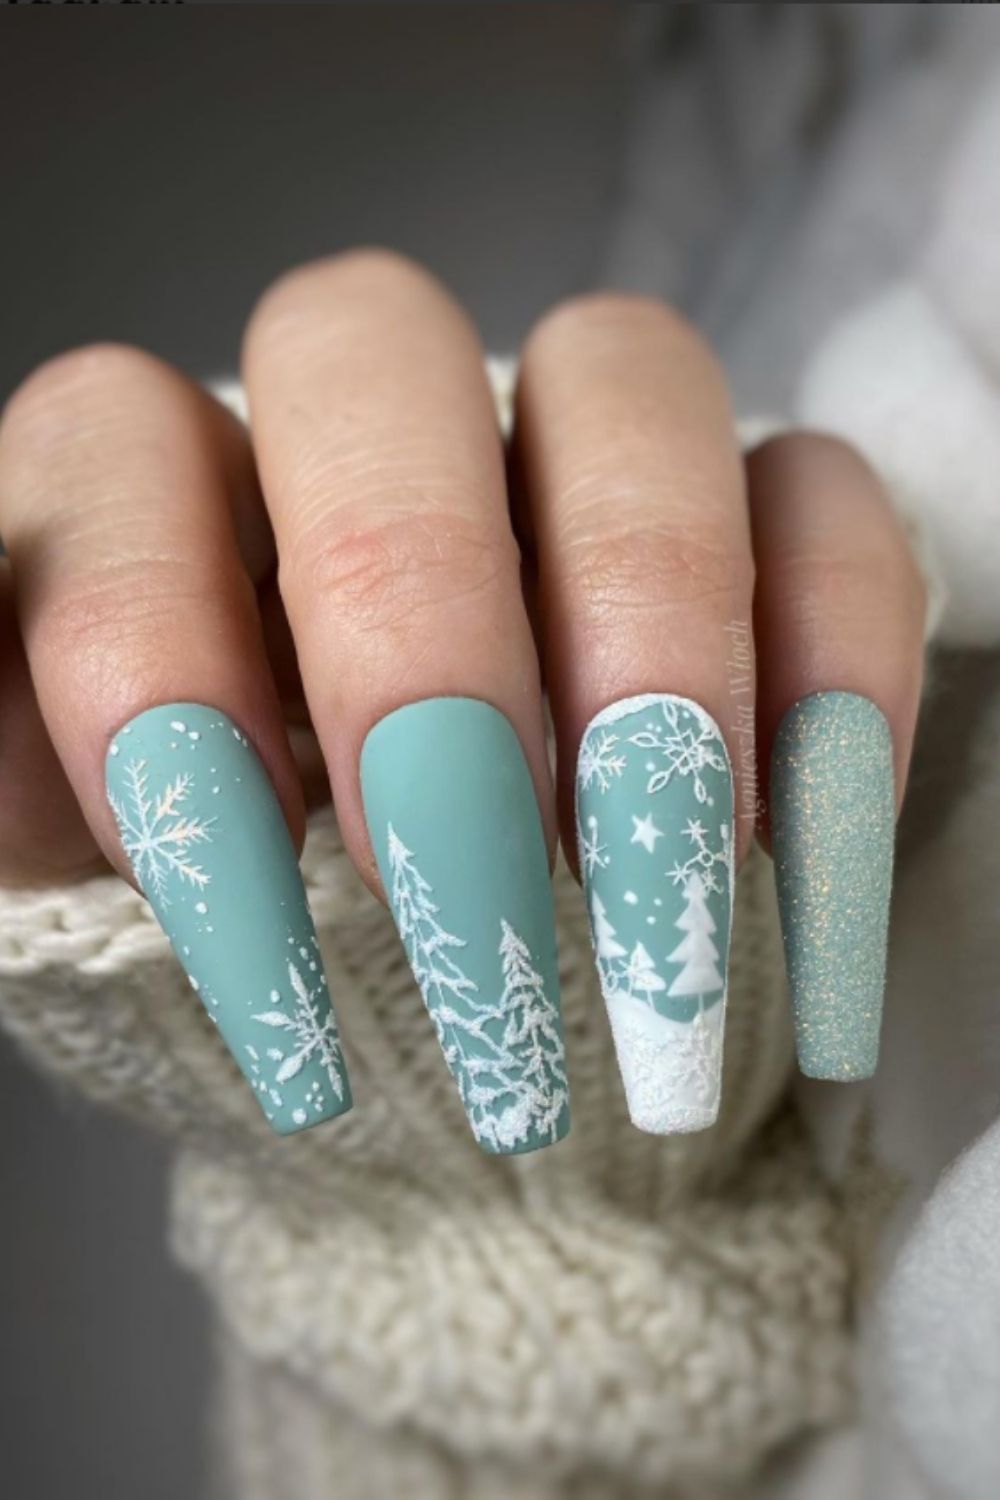 Coffin christmas nails ideas with glitter christmas tree and snowflake